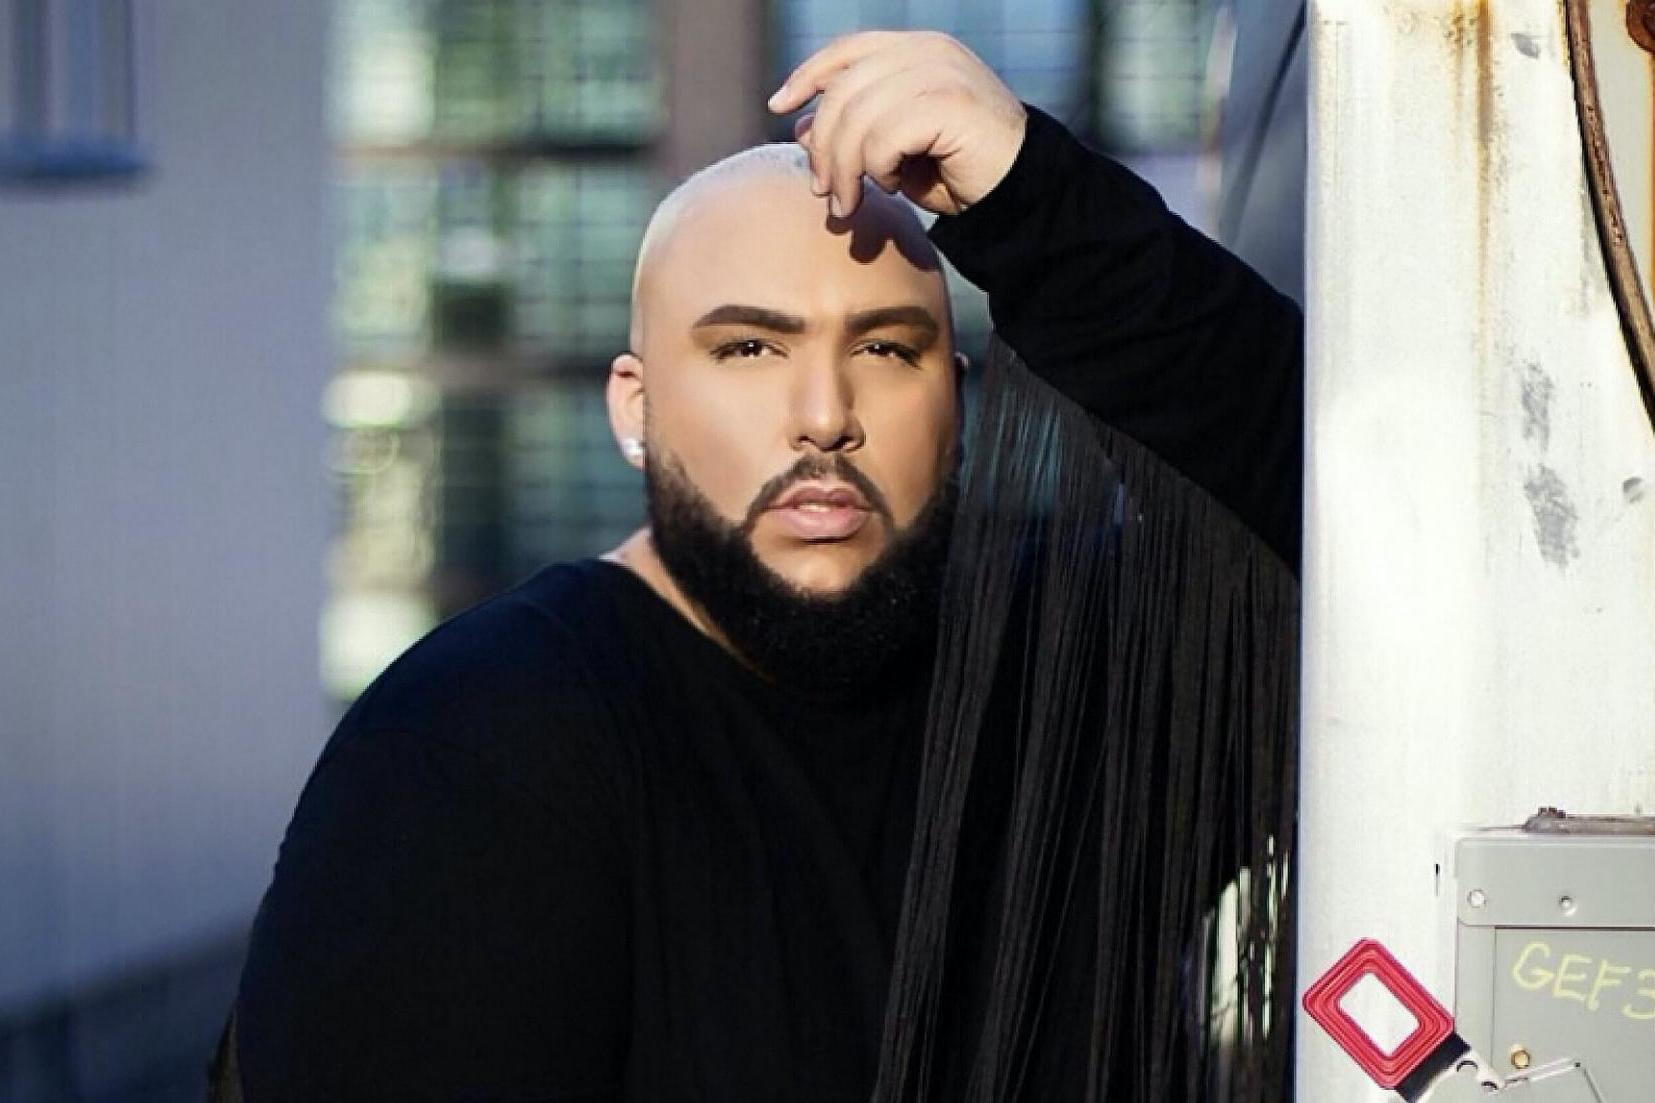 Arcadio Del Valle is a plus-size male model who aspires to celebrate body positivity and self-acceptance